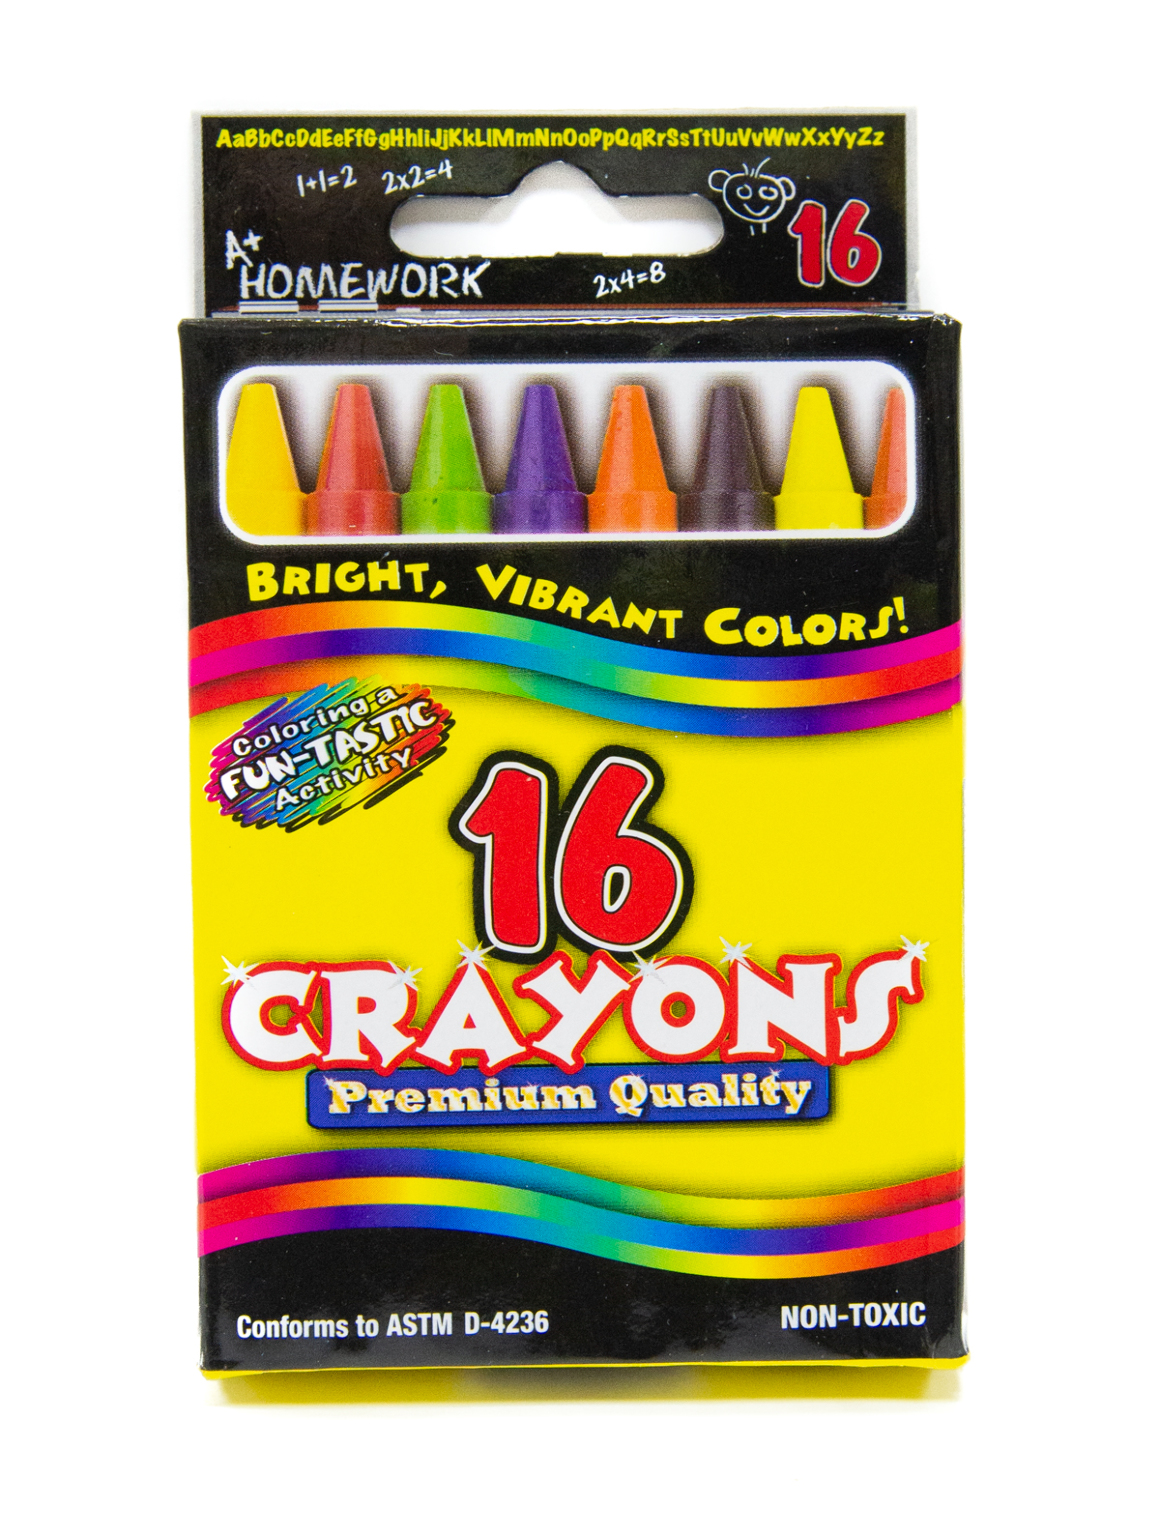 Crayola Crayons 16 Per Box (Pack of 12) 192 Crayons in Total